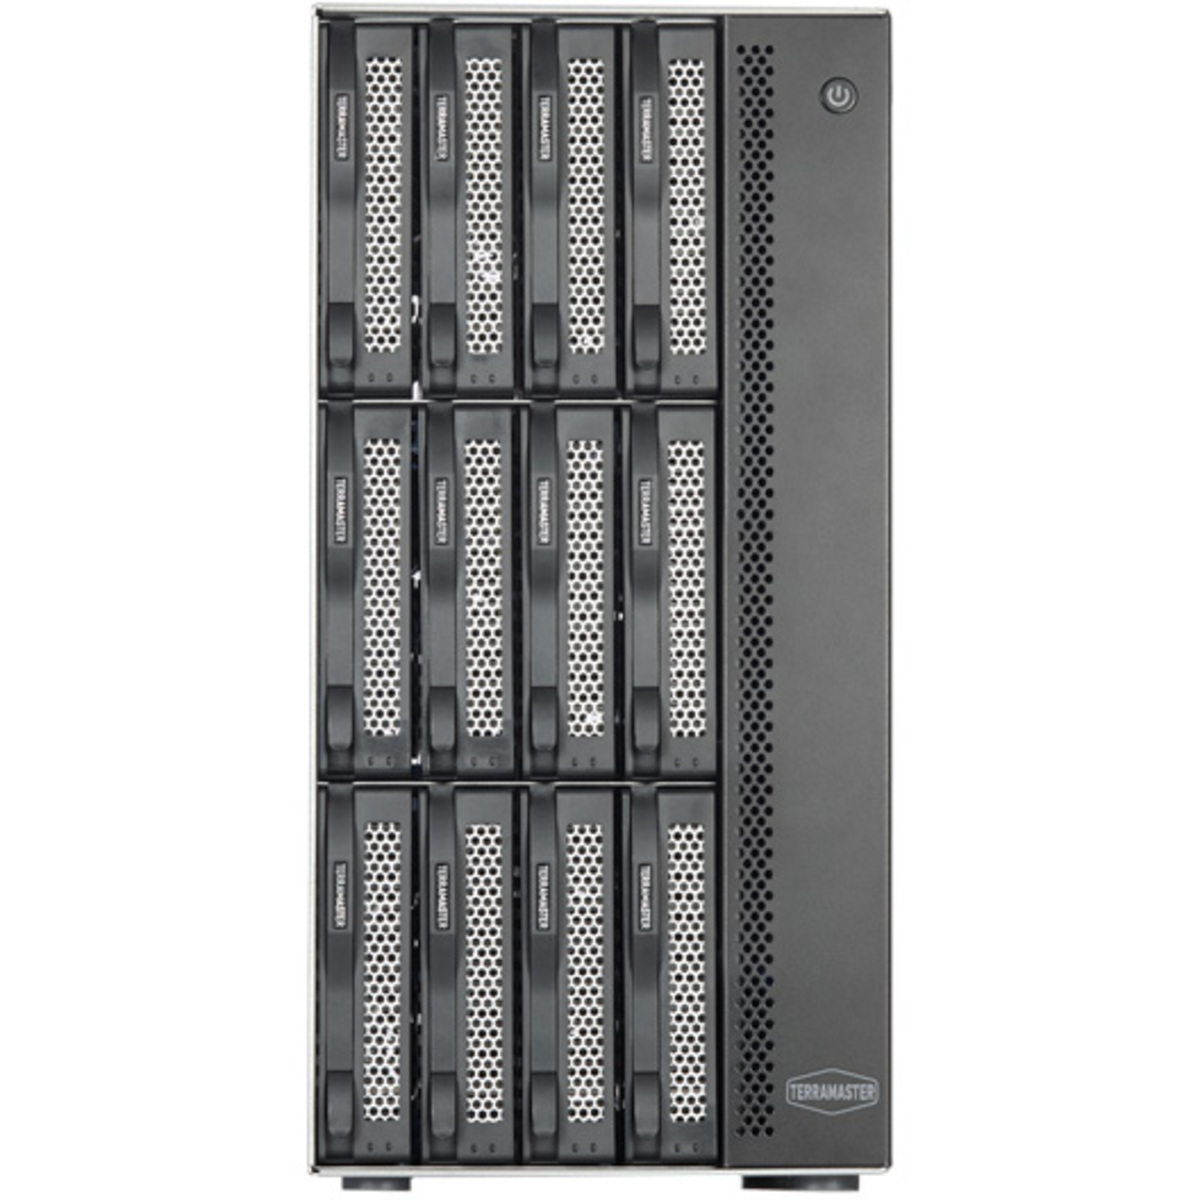 TerraMaster T12-423 180tb 12-Bay Desktop Multimedia / Power User / Business NAS - Network Attached Storage Device 9x20tb Western Digital Ultrastar HC560 WUH722020ALE6L4 3.5 7200rpm SATA 6Gb/s HDD ENTERPRISE Class Drives Installed - Burn-In Tested T12-423